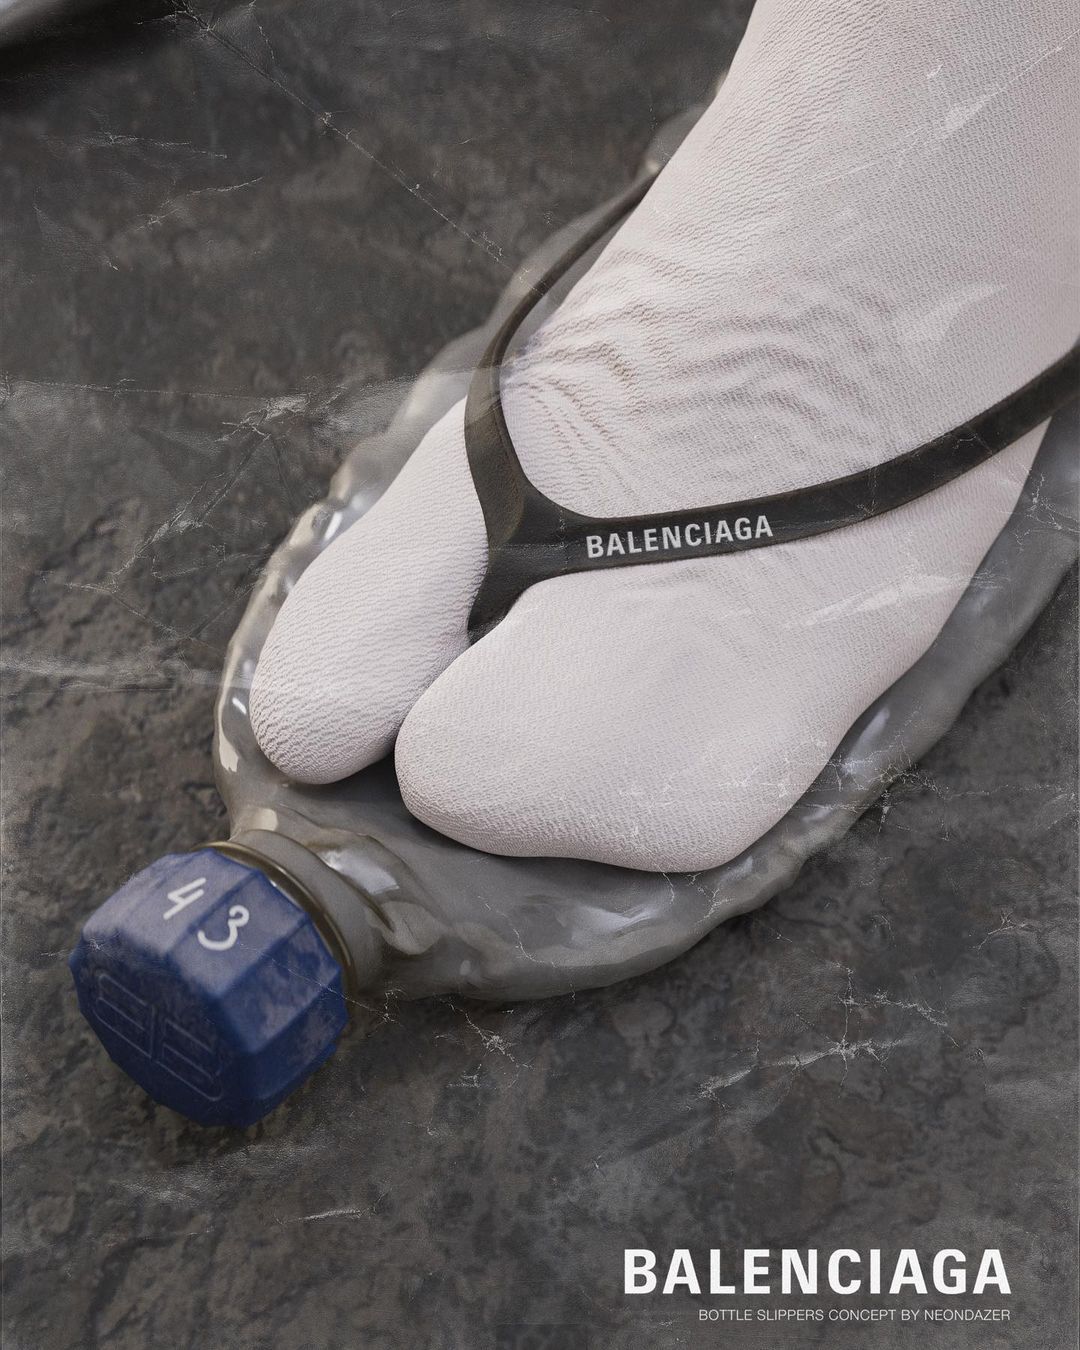 Balenciaga Is Selling Flip Flops In The Shape Of Used Mineral Water Bottles